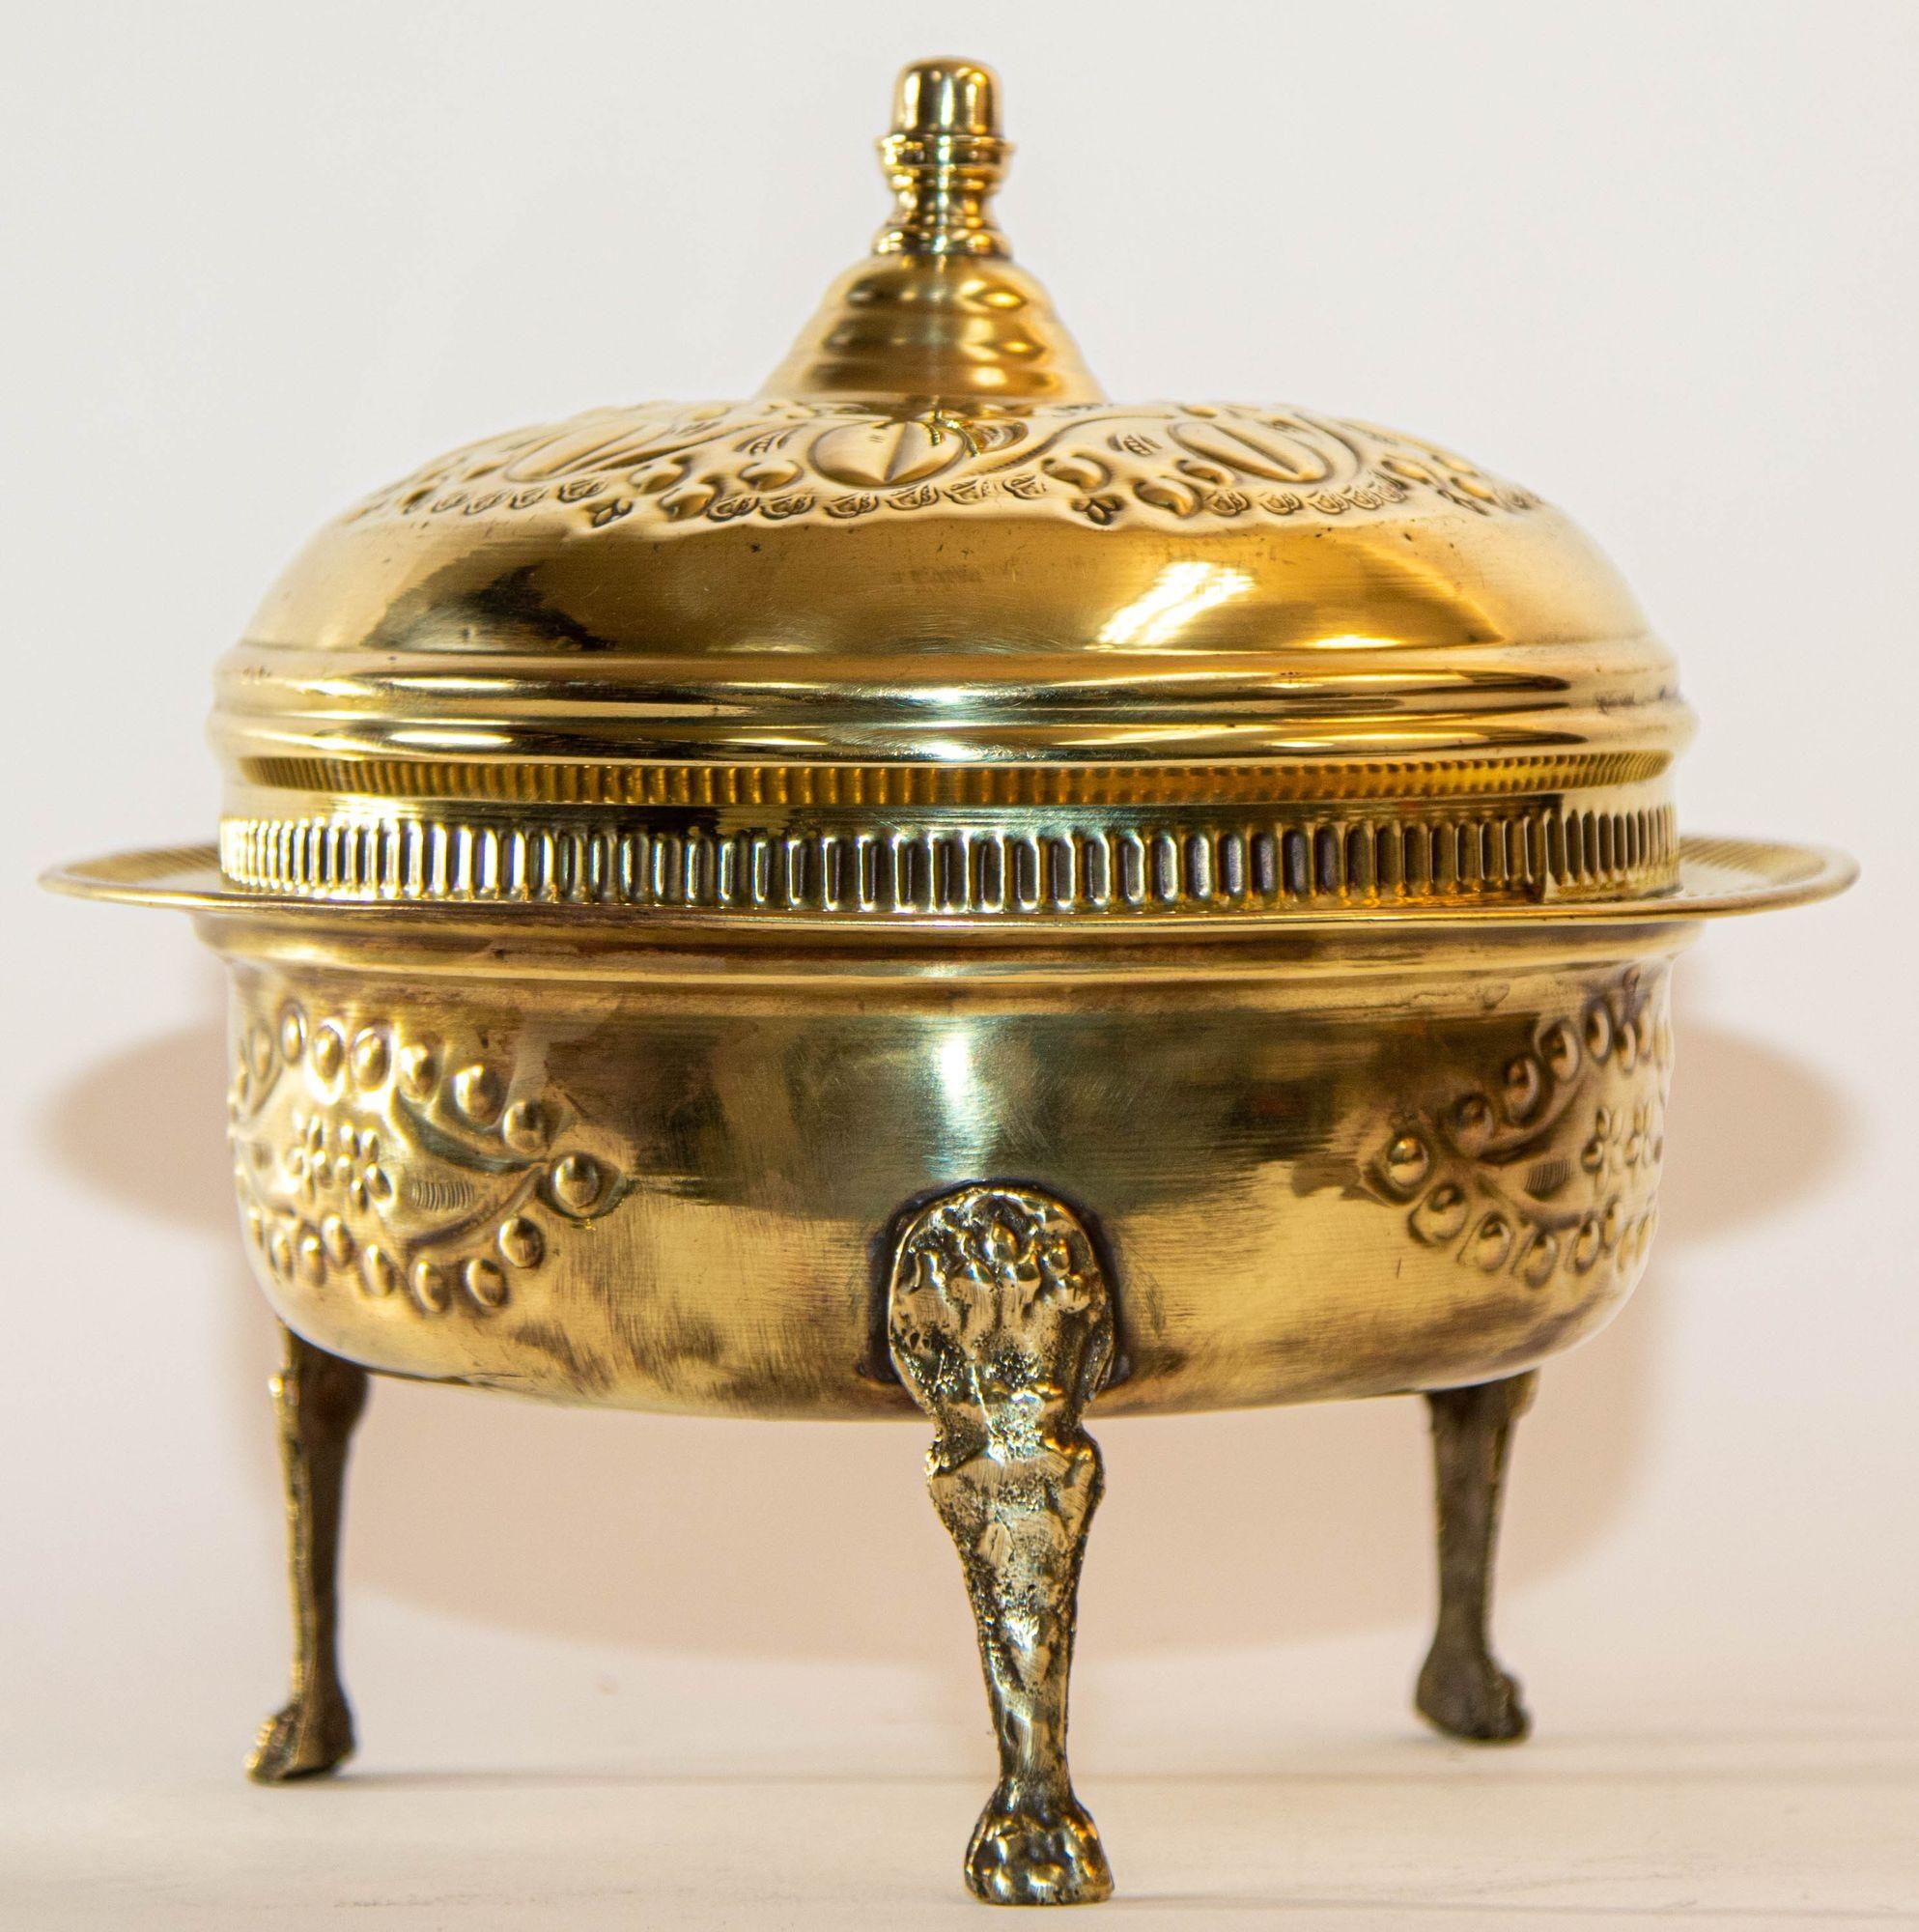 Antique round Moroccan brass dish with dome lid and paw lion feet.
Beautiful Moroccan handcrafted covered footed serving dish with embossed textured brass top and bowl.
This lovely piece features a domed lid hammered with etched engraved design and